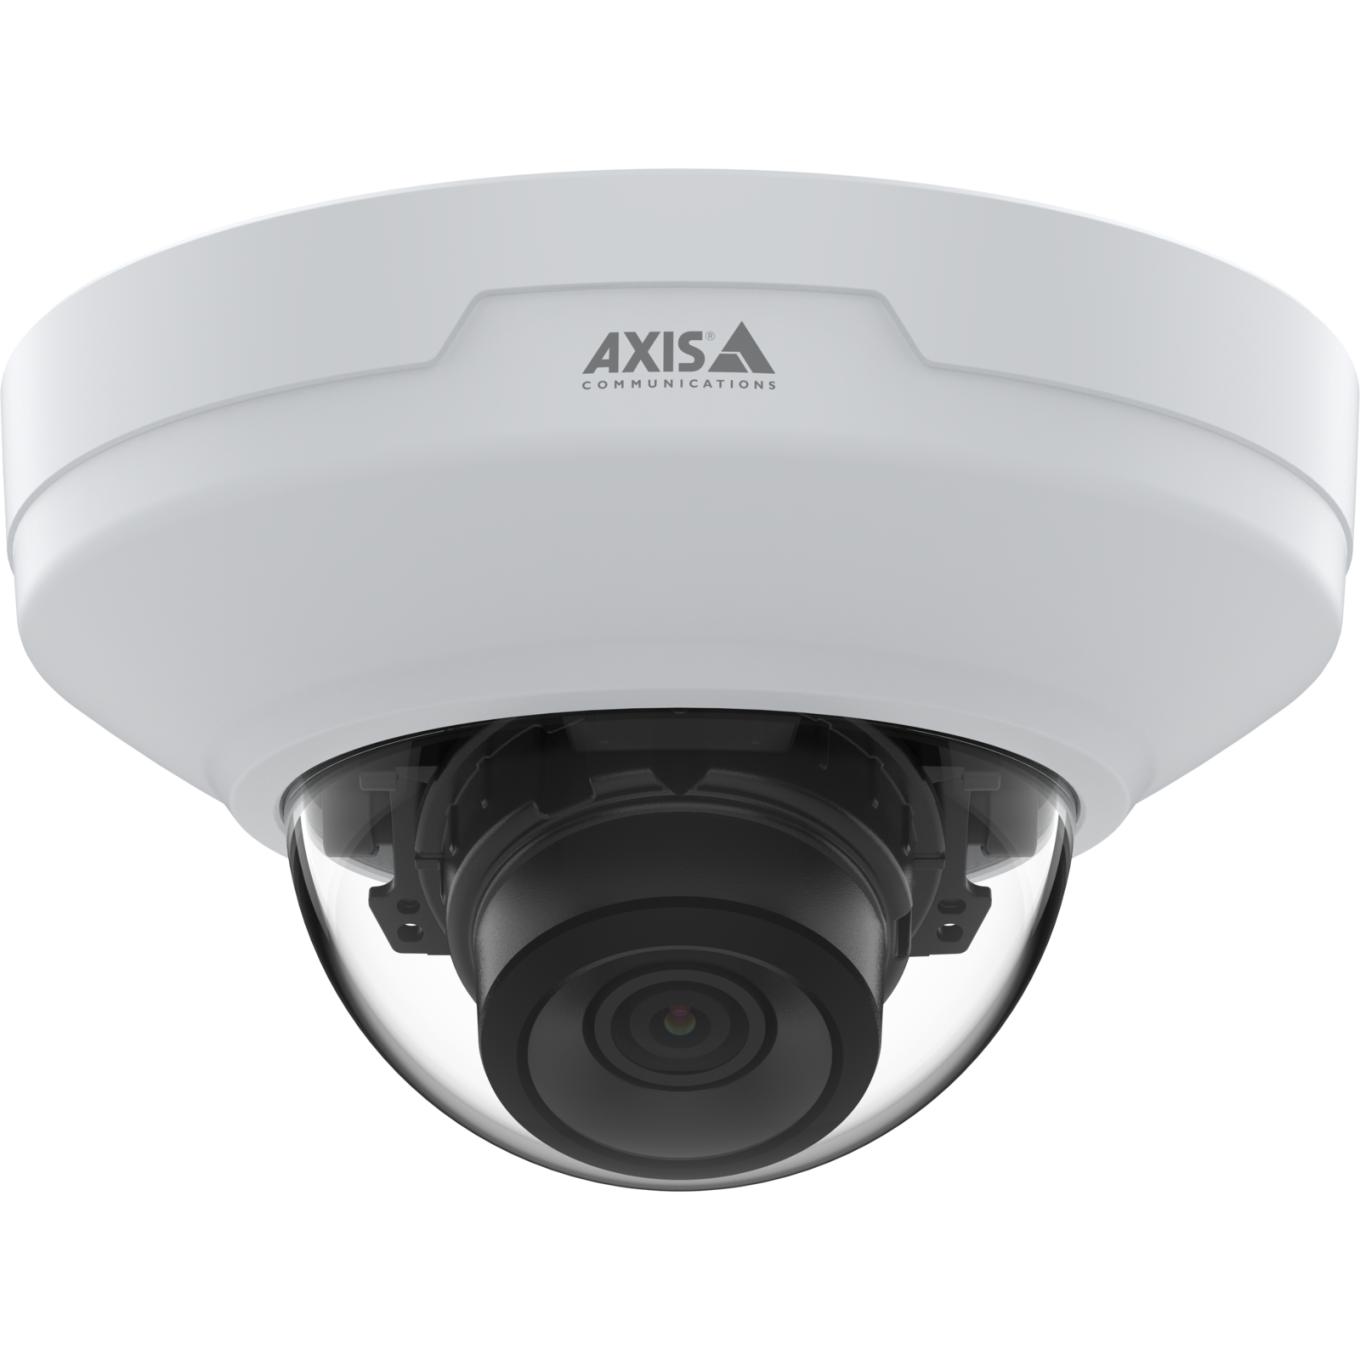 AXIS M4218-V Dome Camera、天井設置、正面から見た図